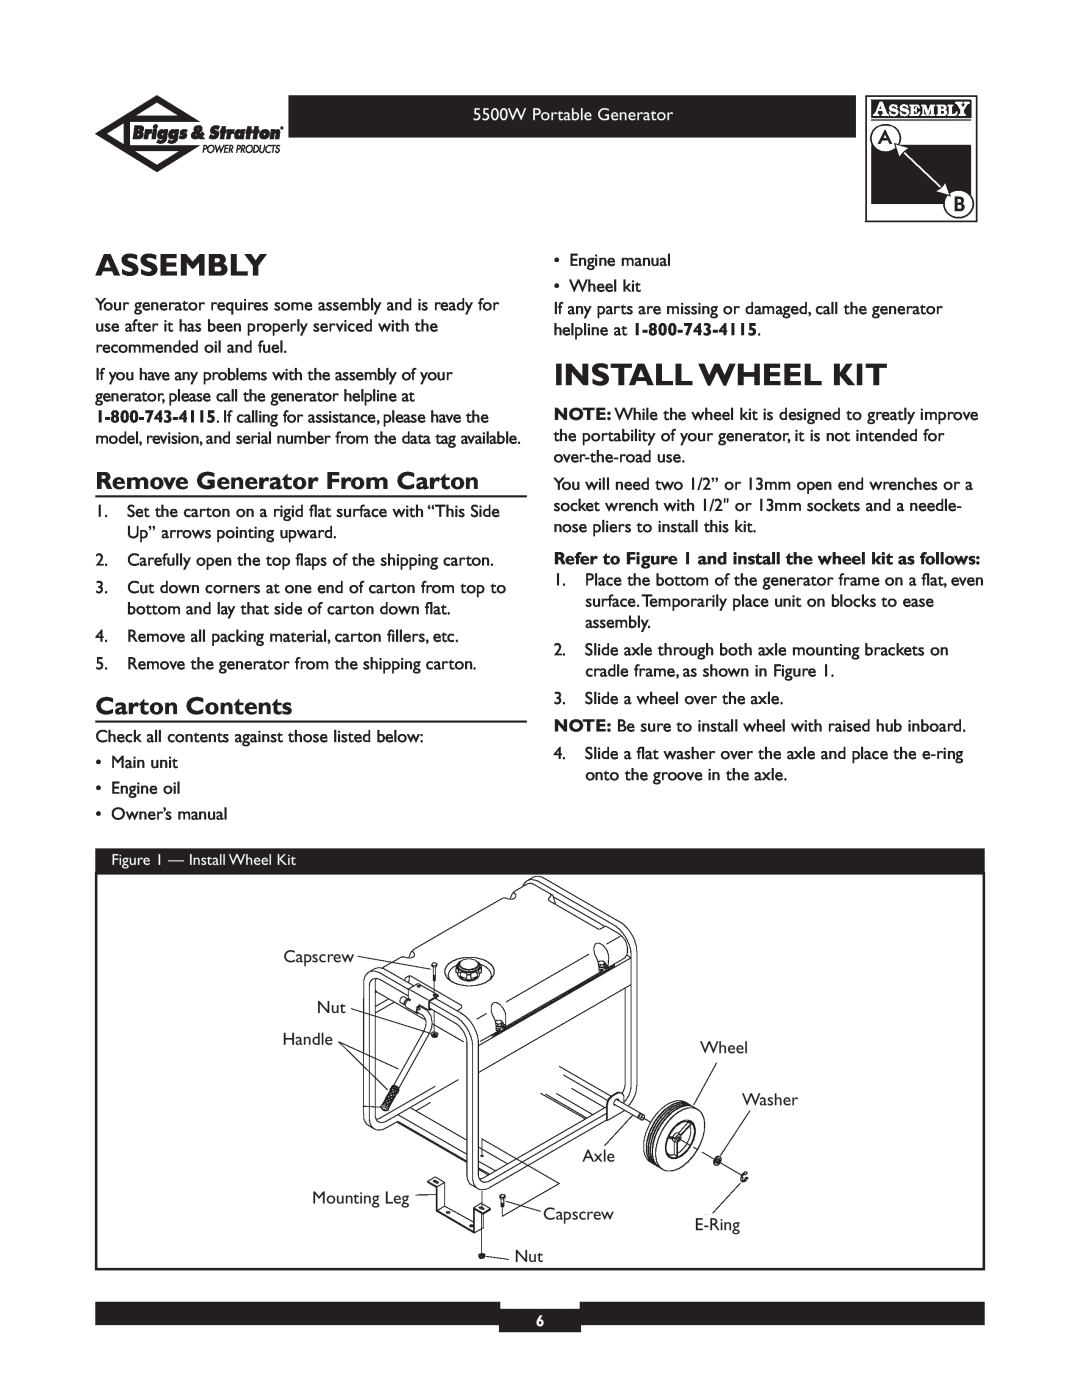 Briggs & Stratton 030209 owner manual Assembly, Install Wheel Kit, Remove Generator From Carton, Carton Contents 